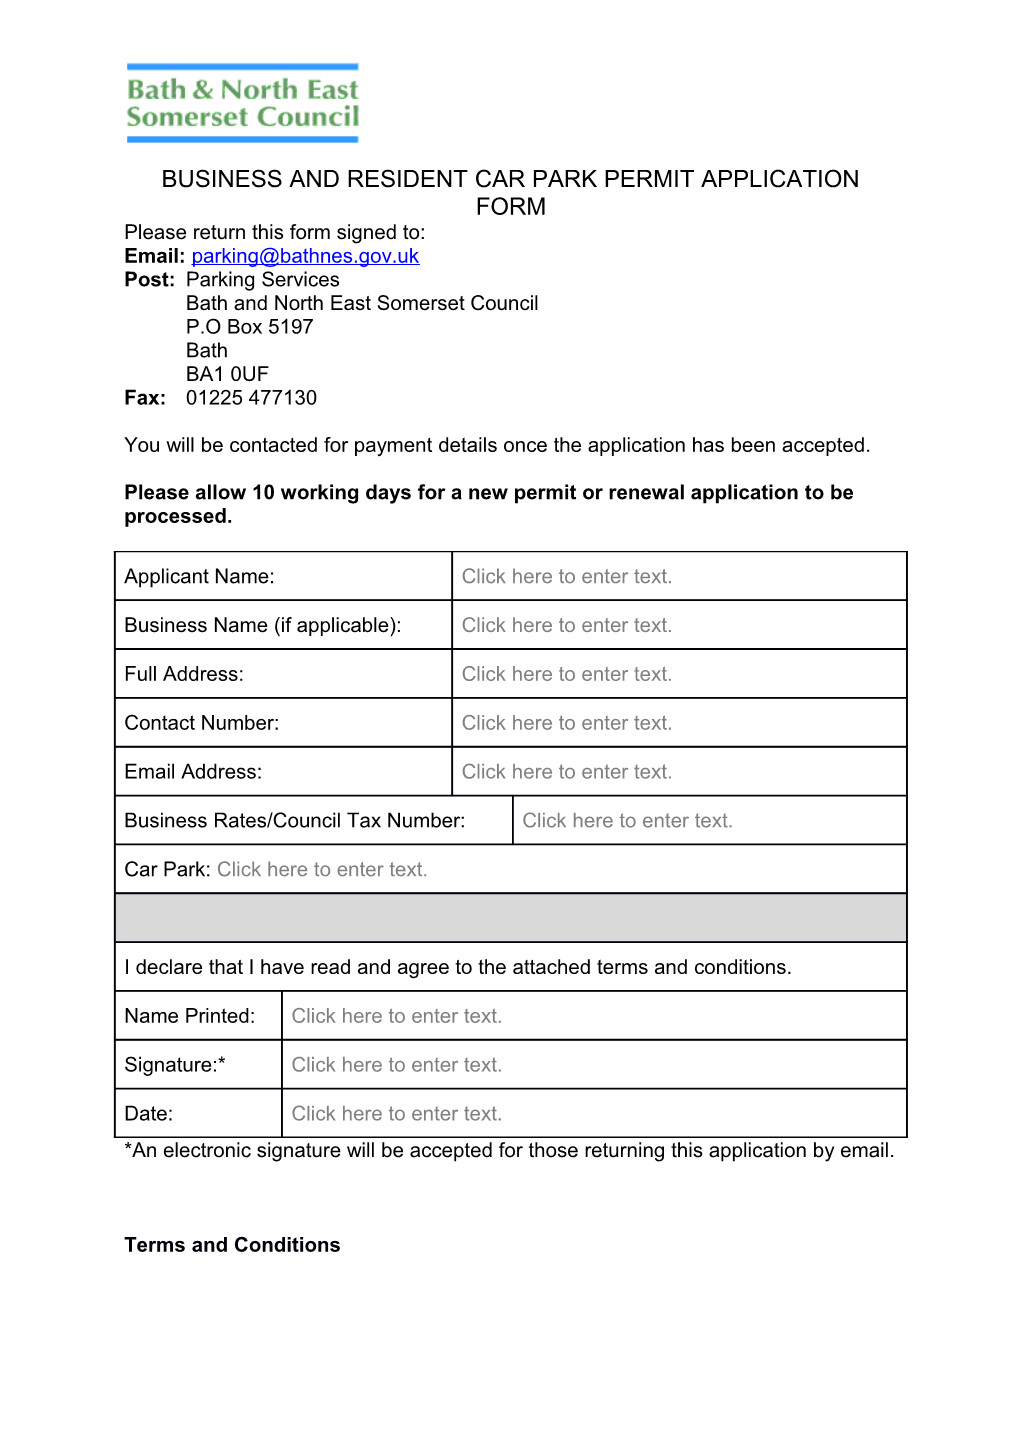 Business and Resident Car Park Permit Application Form s1